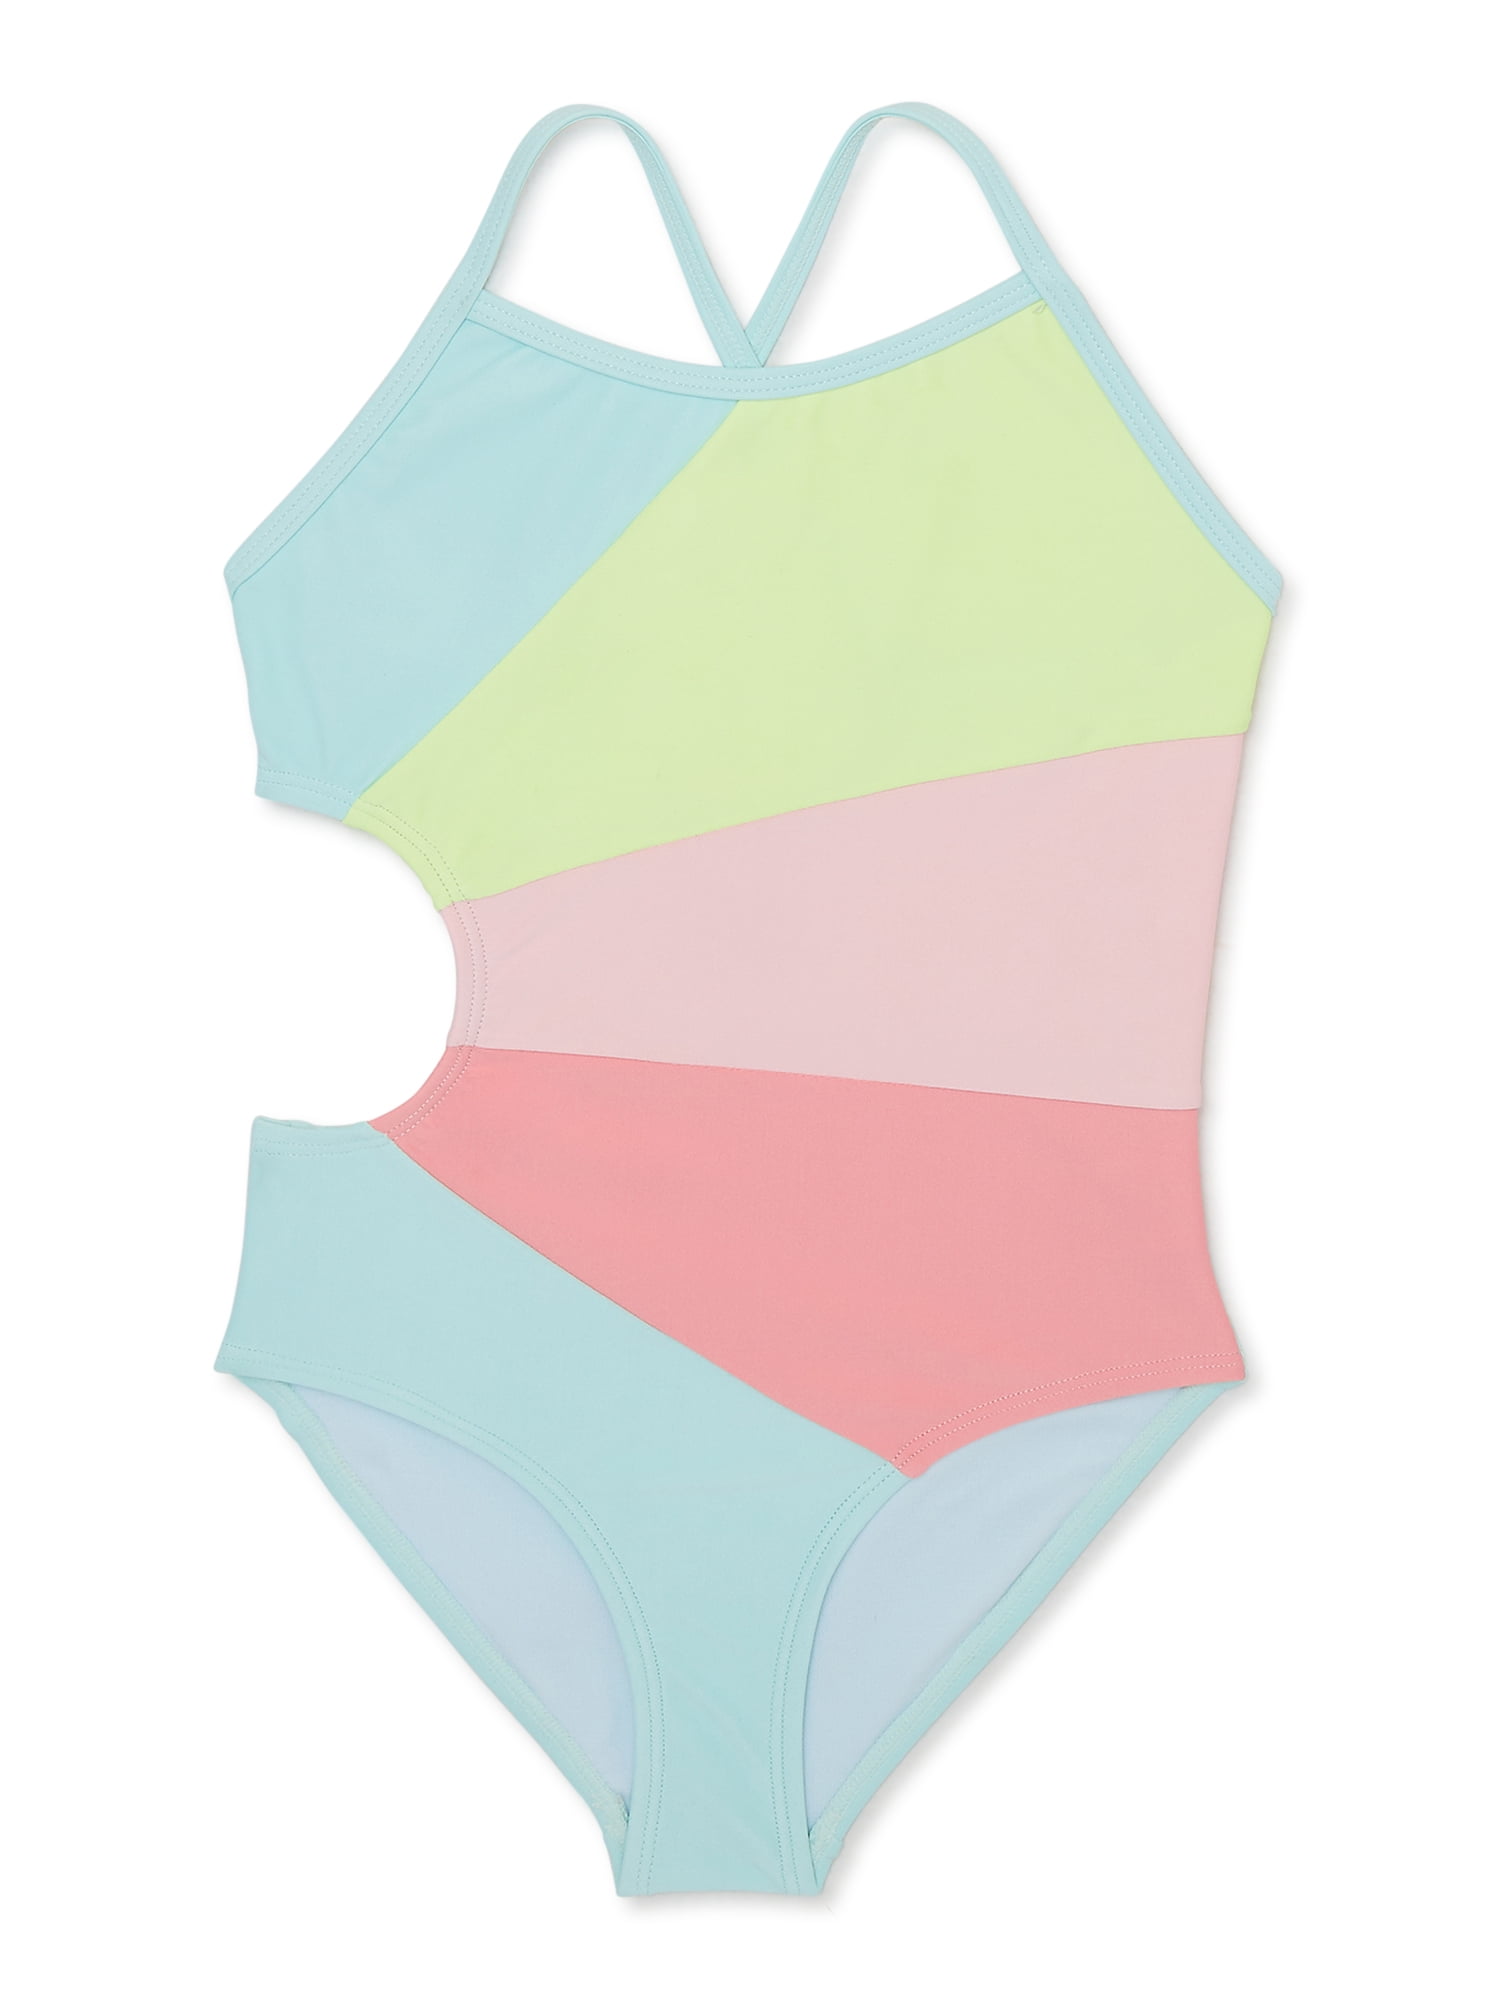 Freestyle Revolution Girls One-Piece Colorblocked Cut Out Swimsuit with ...